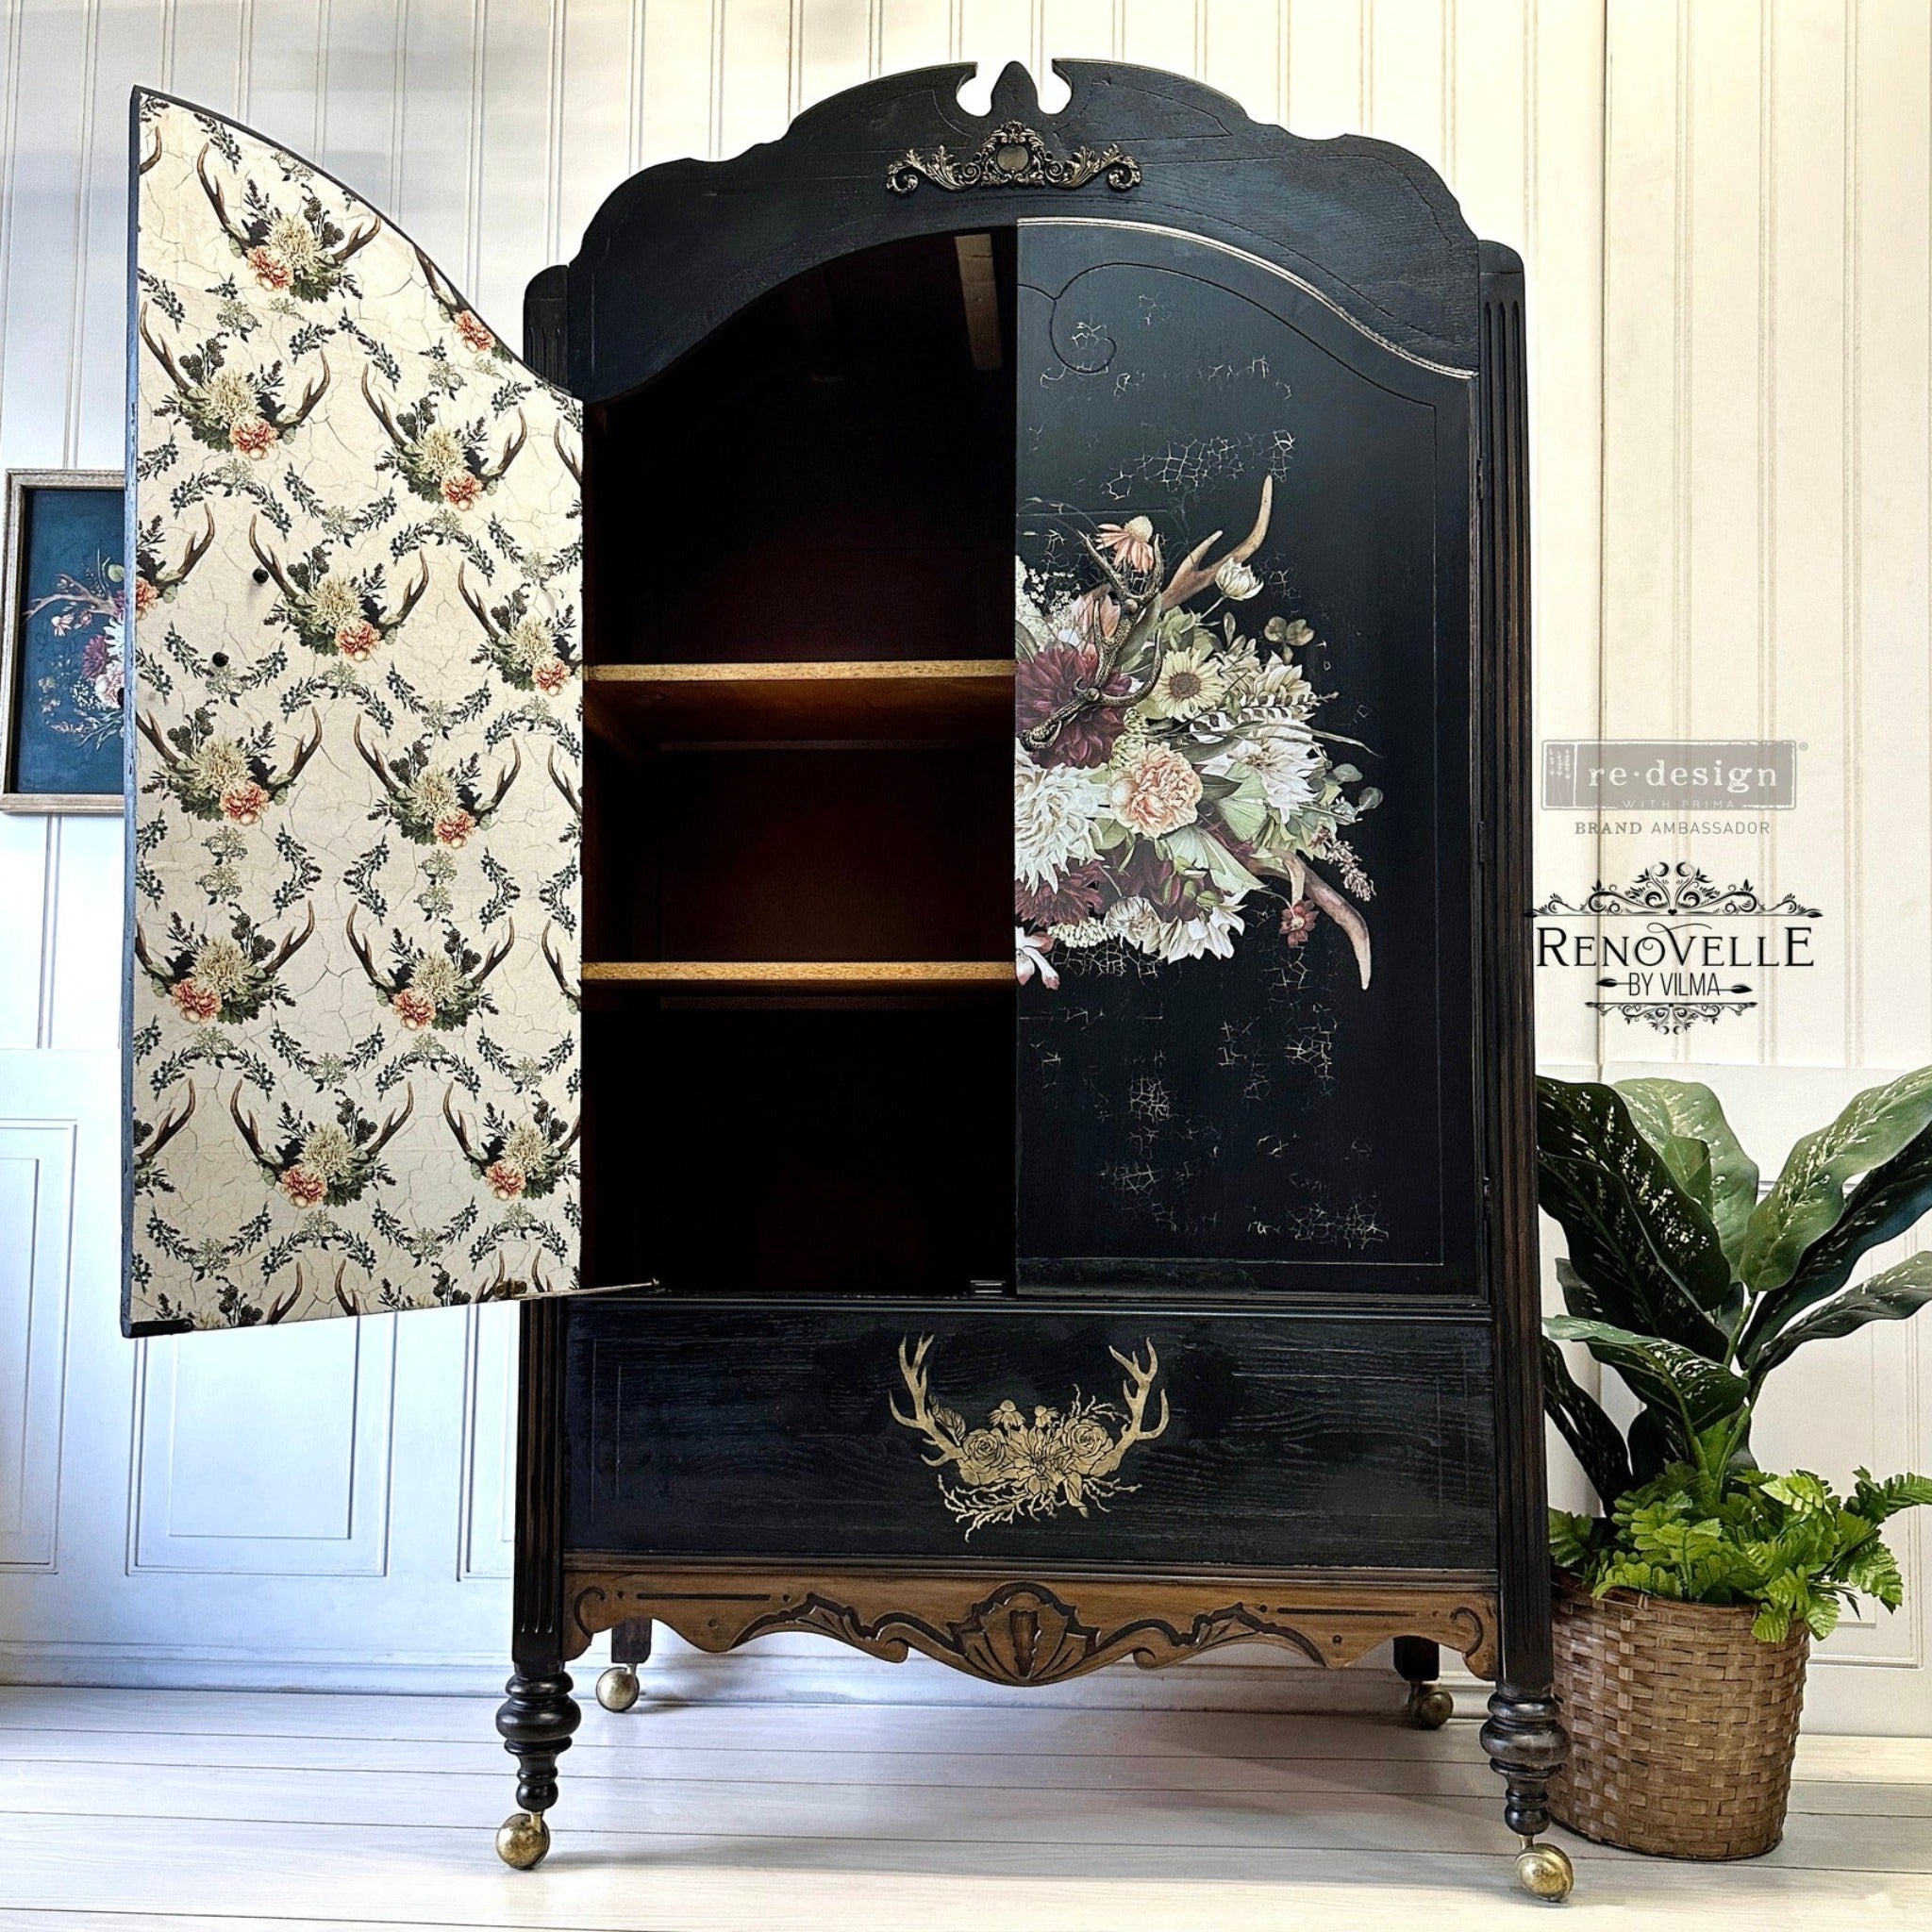 A vintage armoire refurbished by Renovelle by Vilma is painted black and features ReDesign with Prima's Cedar Creek tissue paper inside its doors.